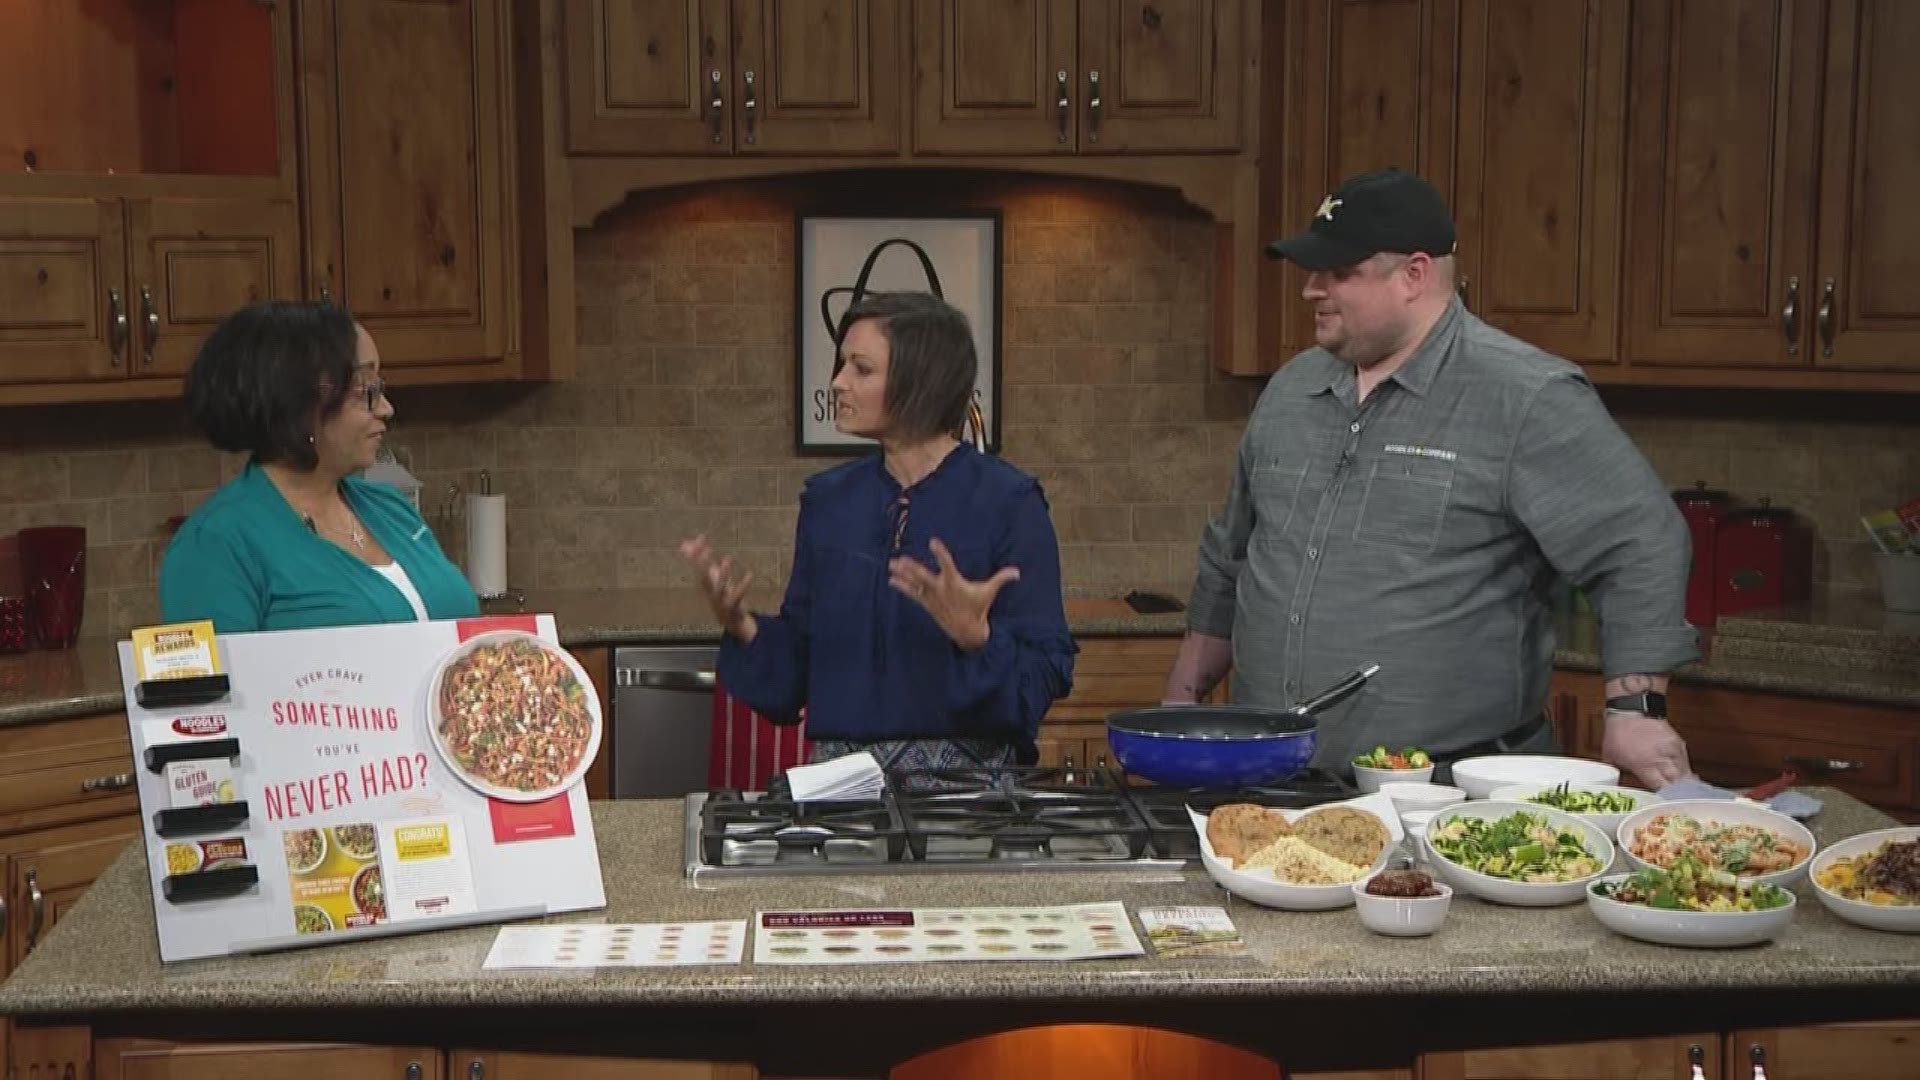 Noodles & Company, the fast casual restaurant chain serving classic noodle and pasta dishes is mixing things up. Zoodlles...zucchini noodles are now an option. Nichole Curry and Chris Wheeler are here with some samples.  